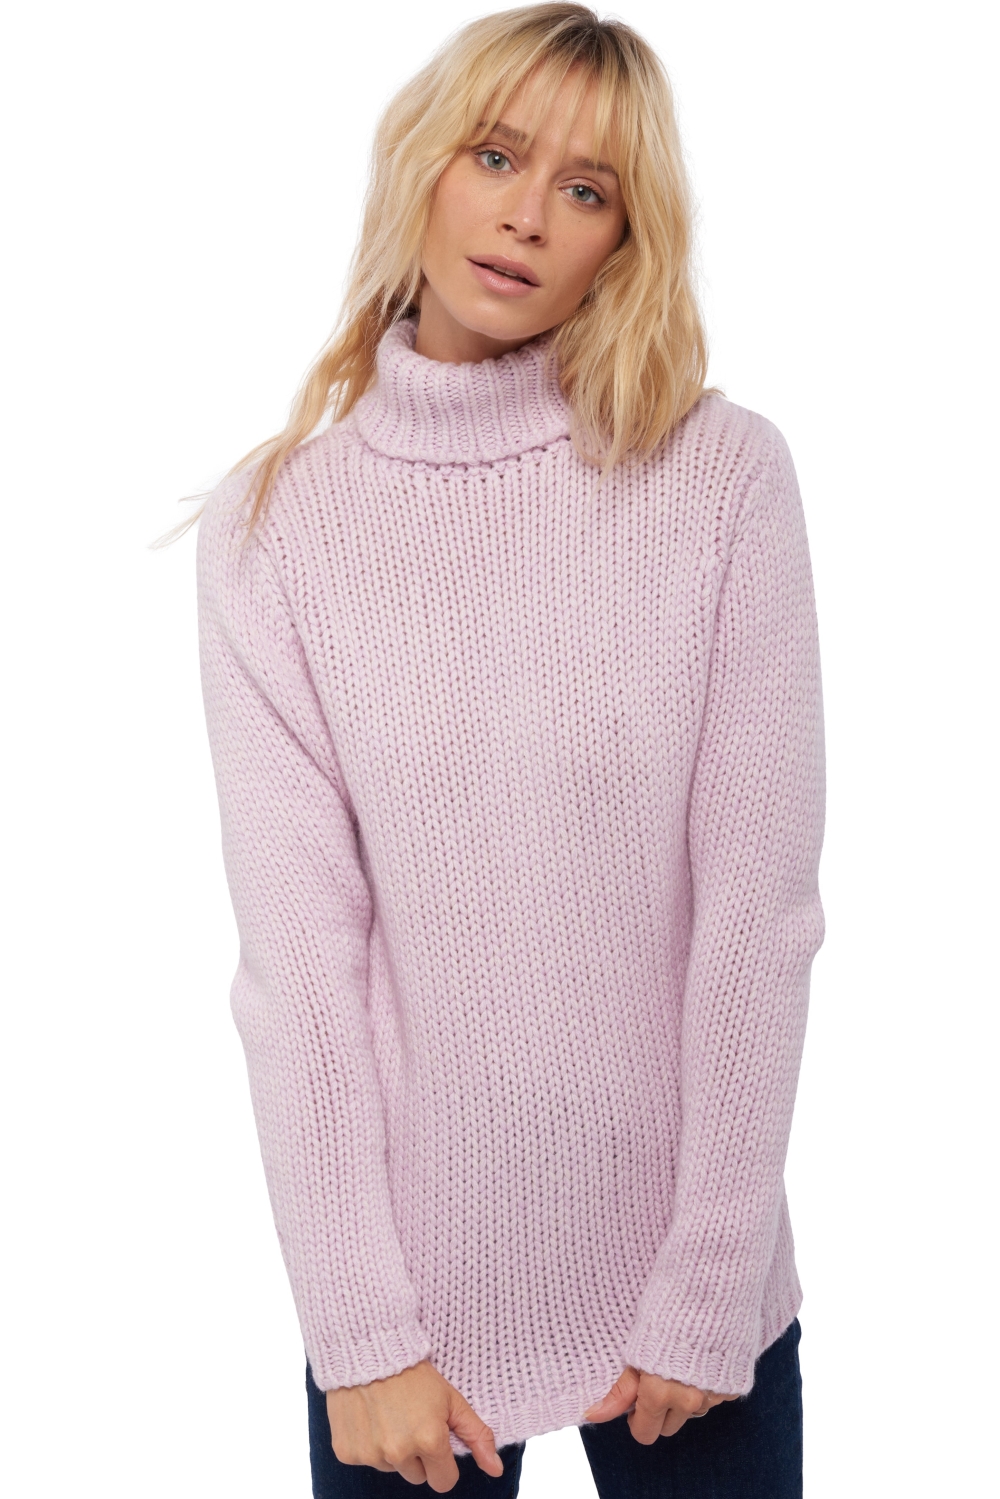 Cachemire pull femme vicenza lilas rose pale l